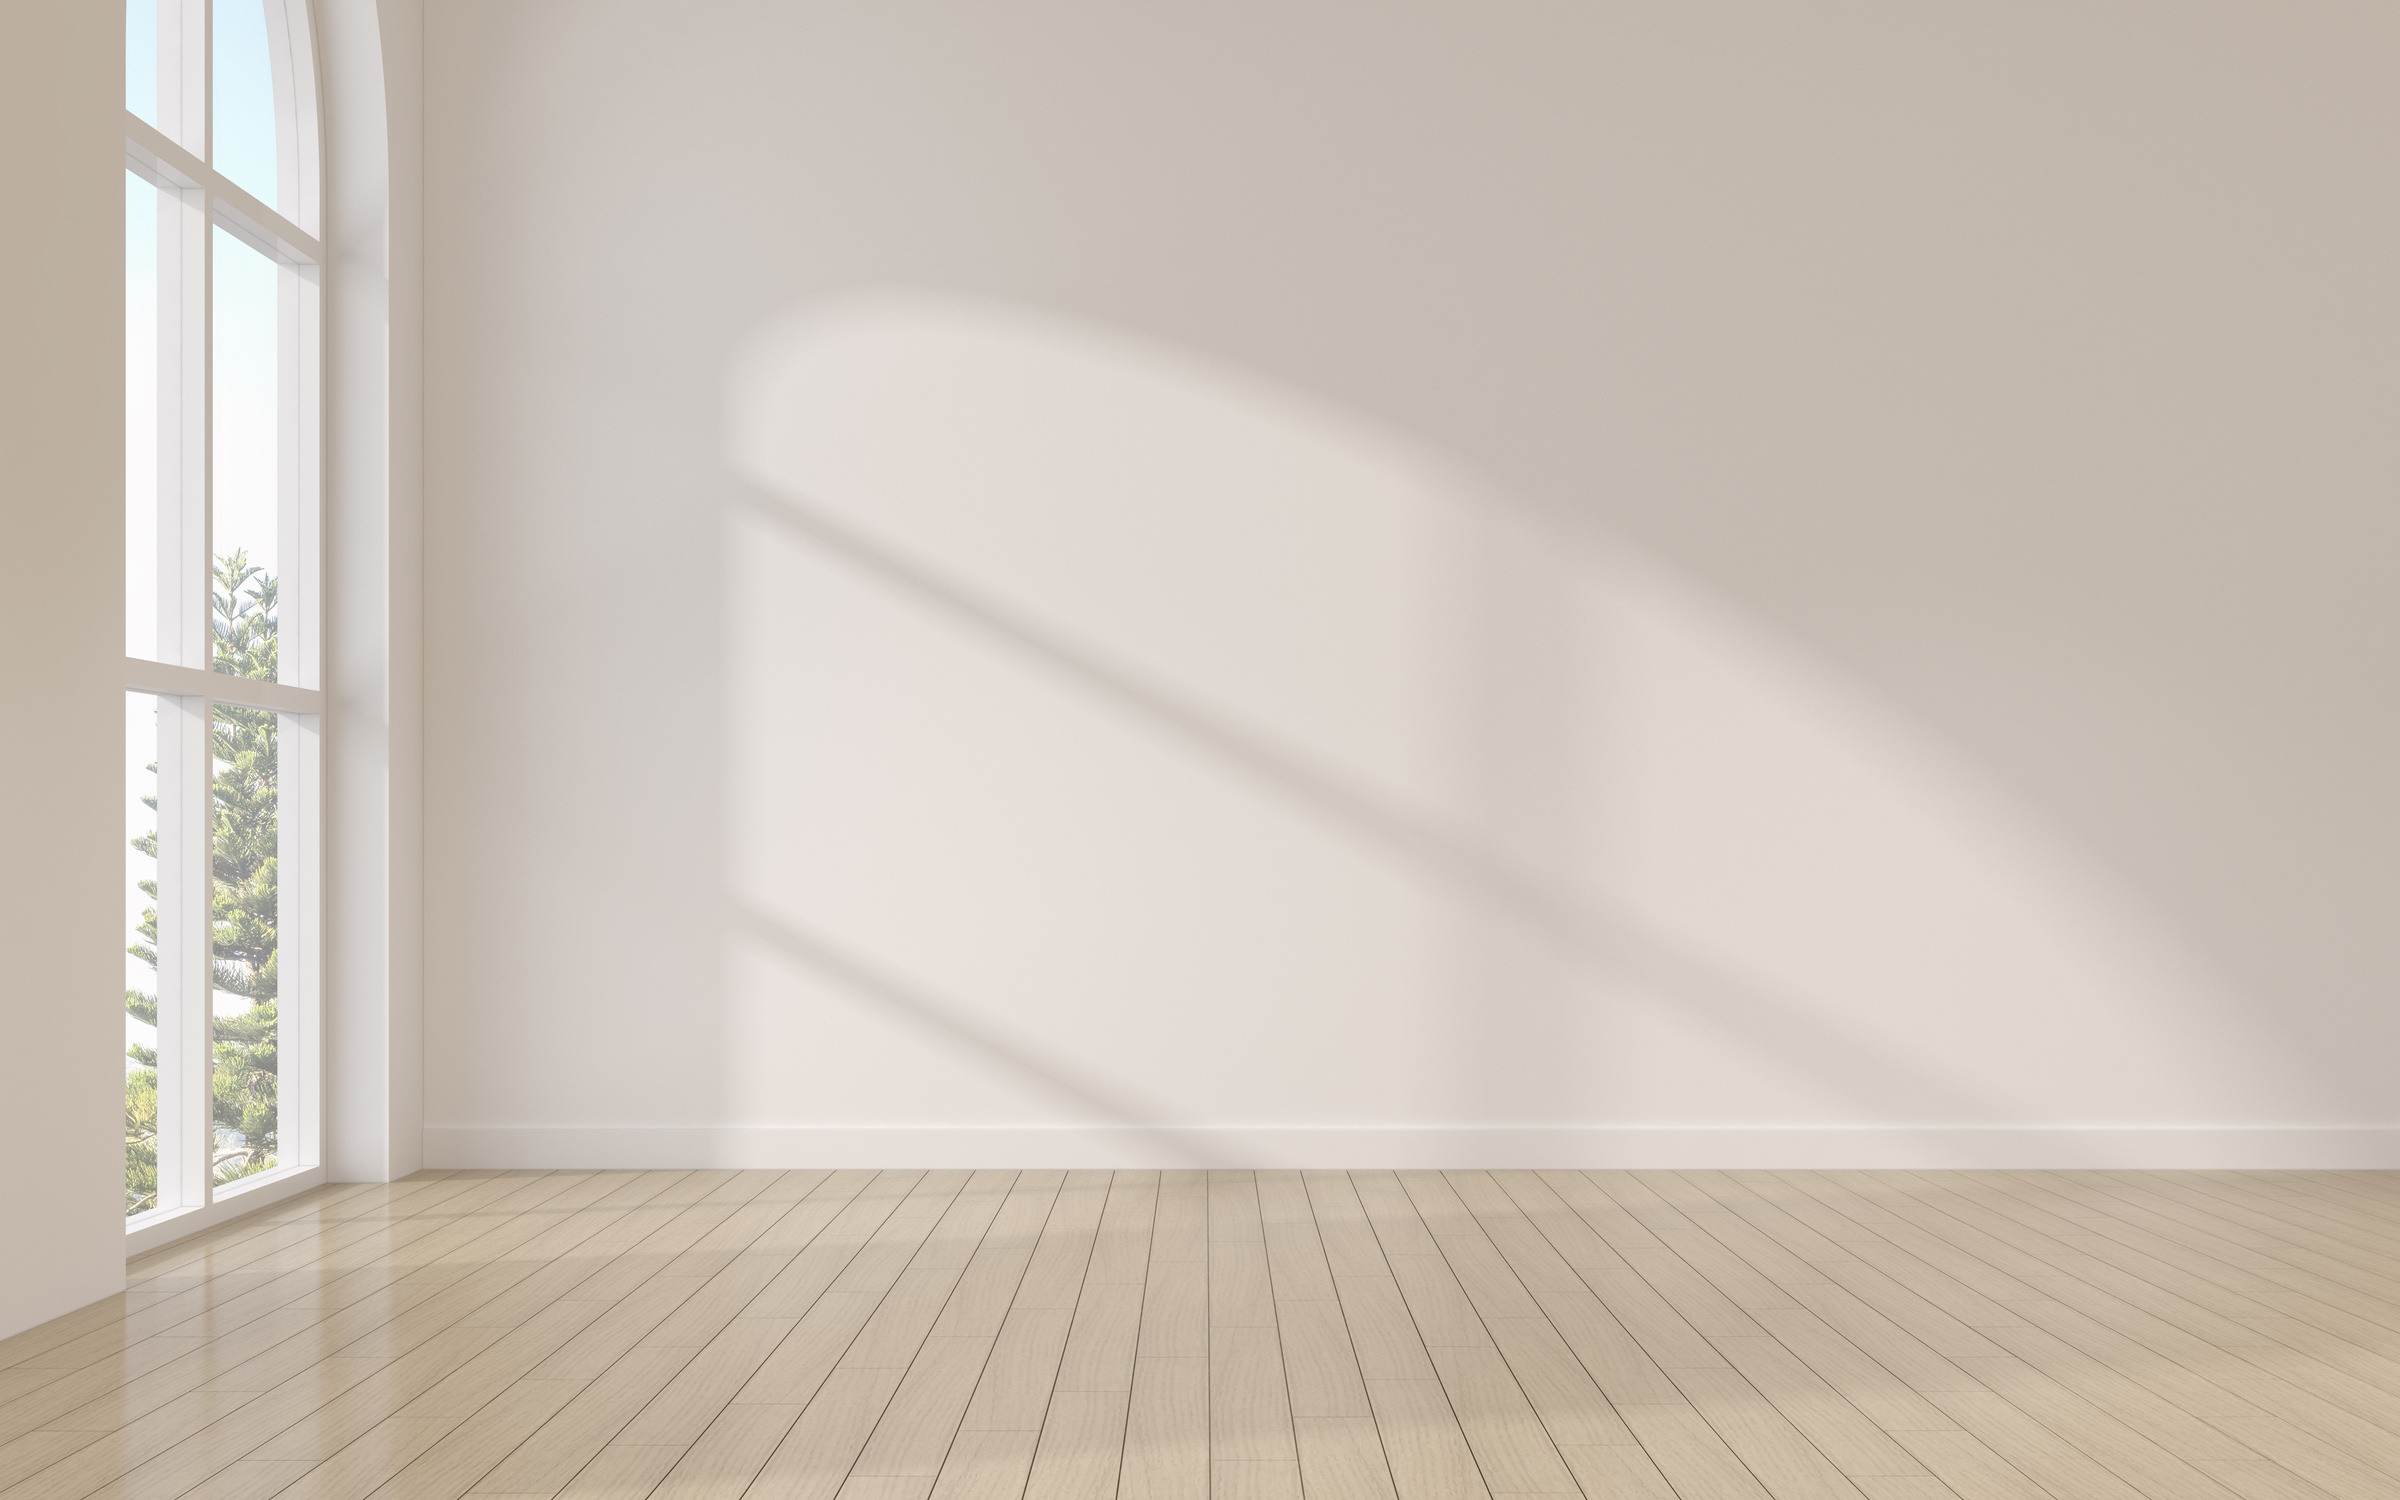 3D Rendering of Empty Room with Shadow on Wall